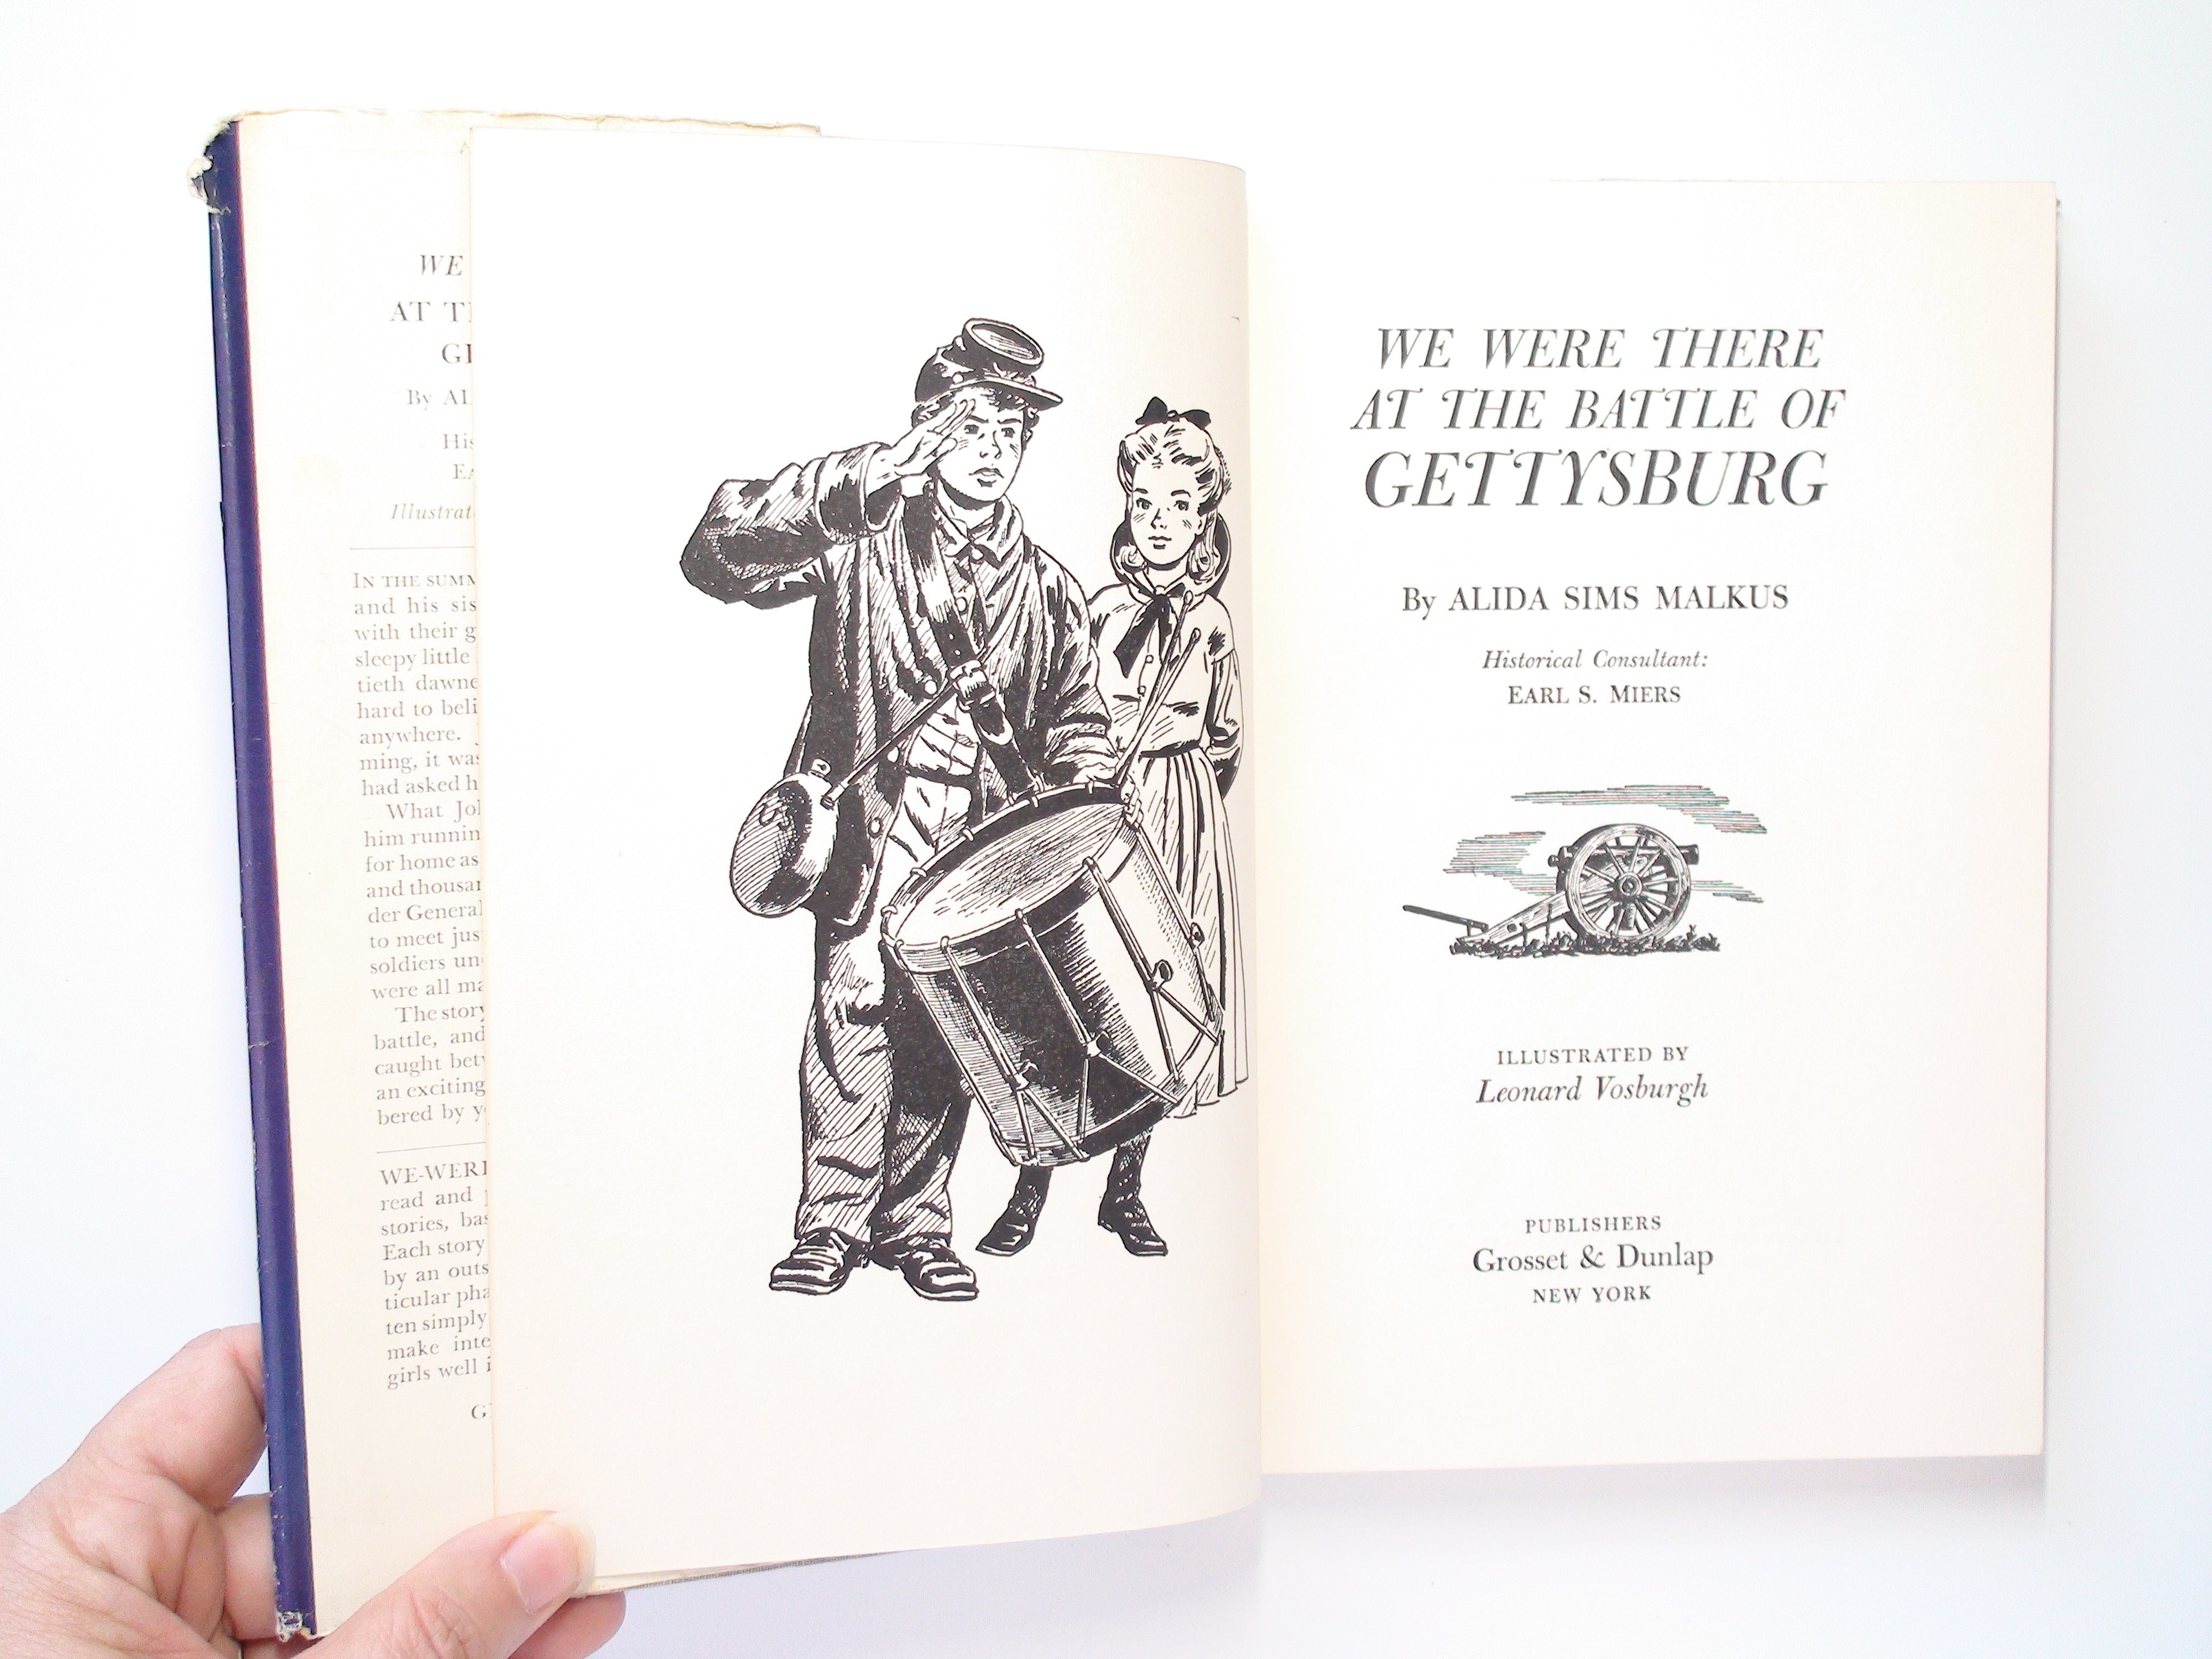 We Were There at the Battle of Gettysburg, Alida Sims Malkus, Illustrated, 1955